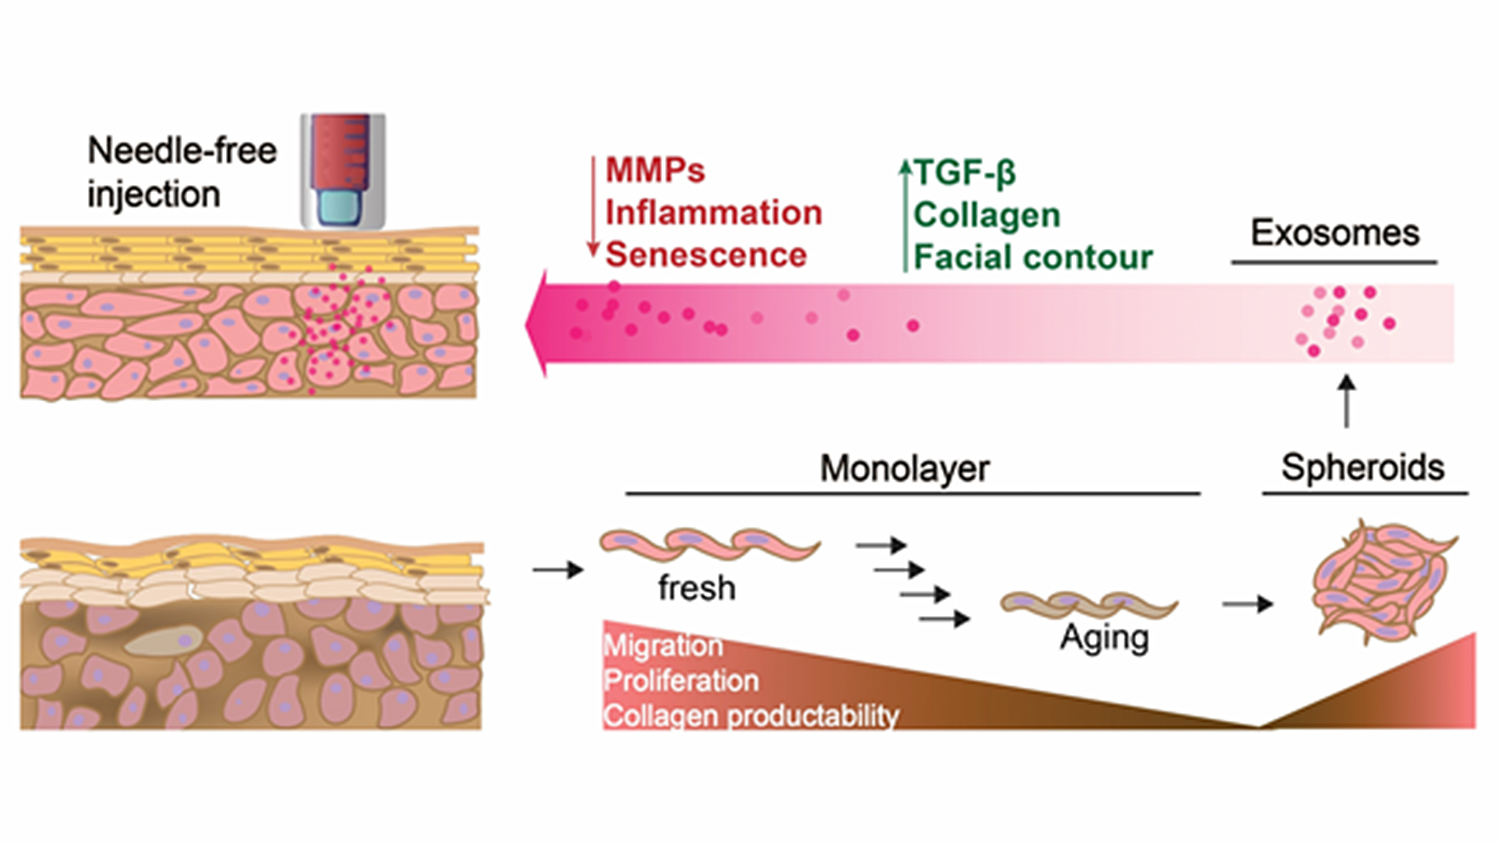 Monolayer dermal fibroblasts were cultured into spheroids, then exosomes were collected and delivered by a needle-free injector for skin aging treatment